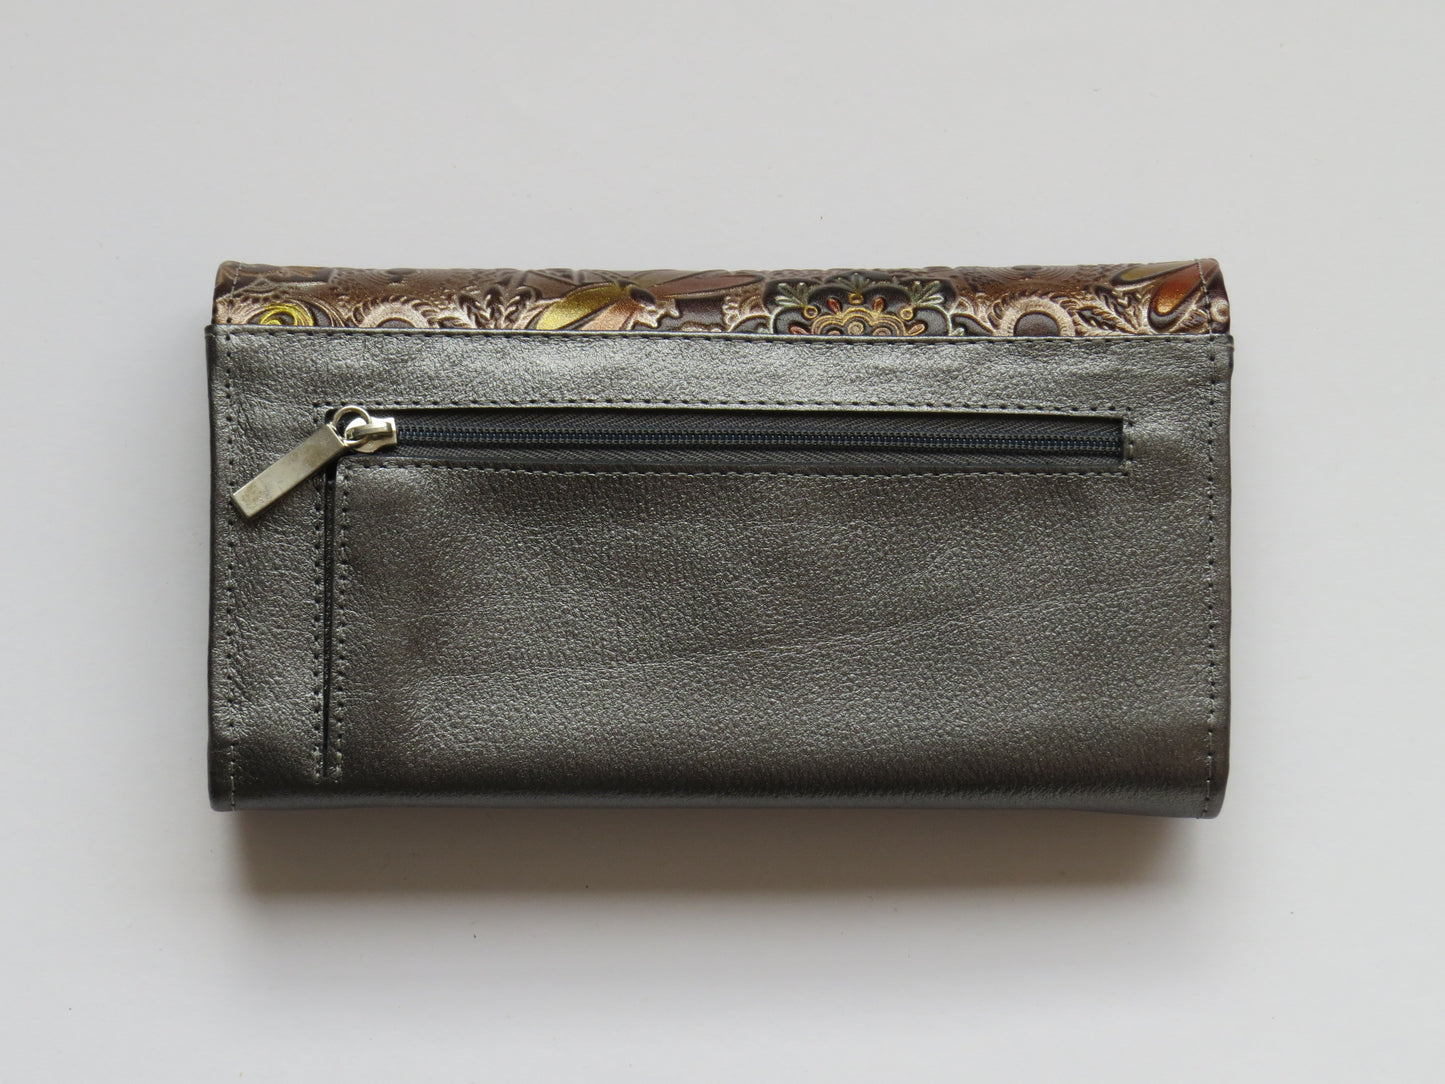 The Dragonfly Women's Leather Wallet